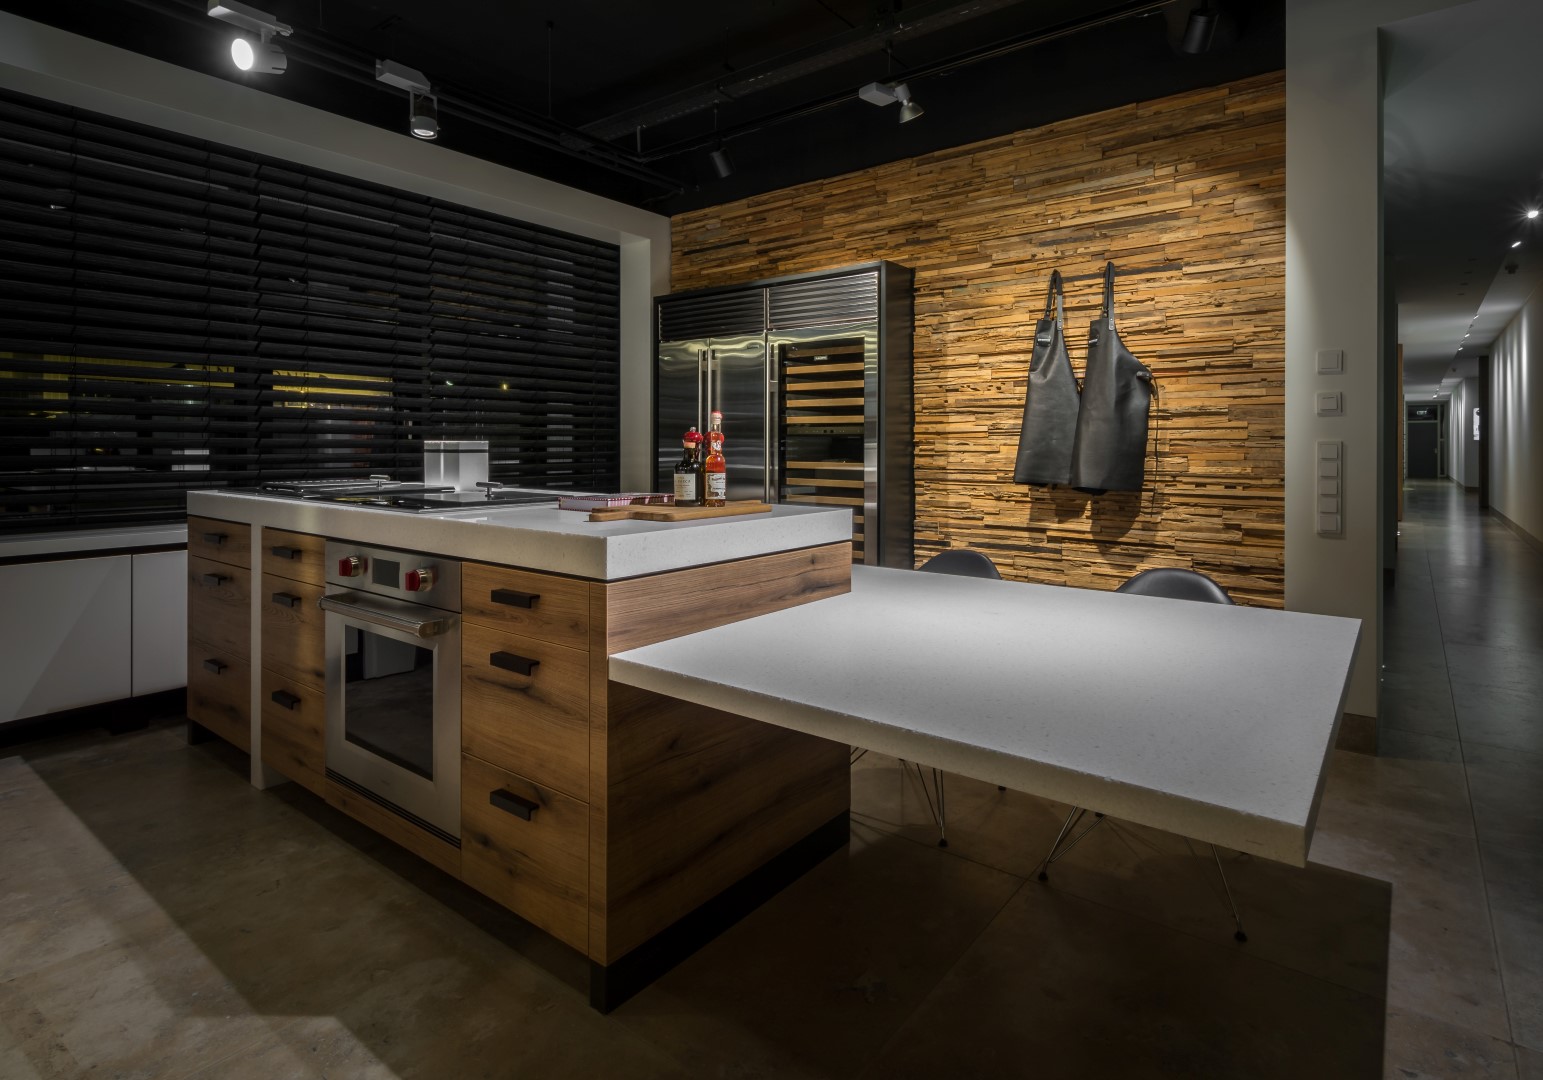 Signature kitchen with coal elements from Wolf and Sub-Zero for a kitchen with a culinary highlight.